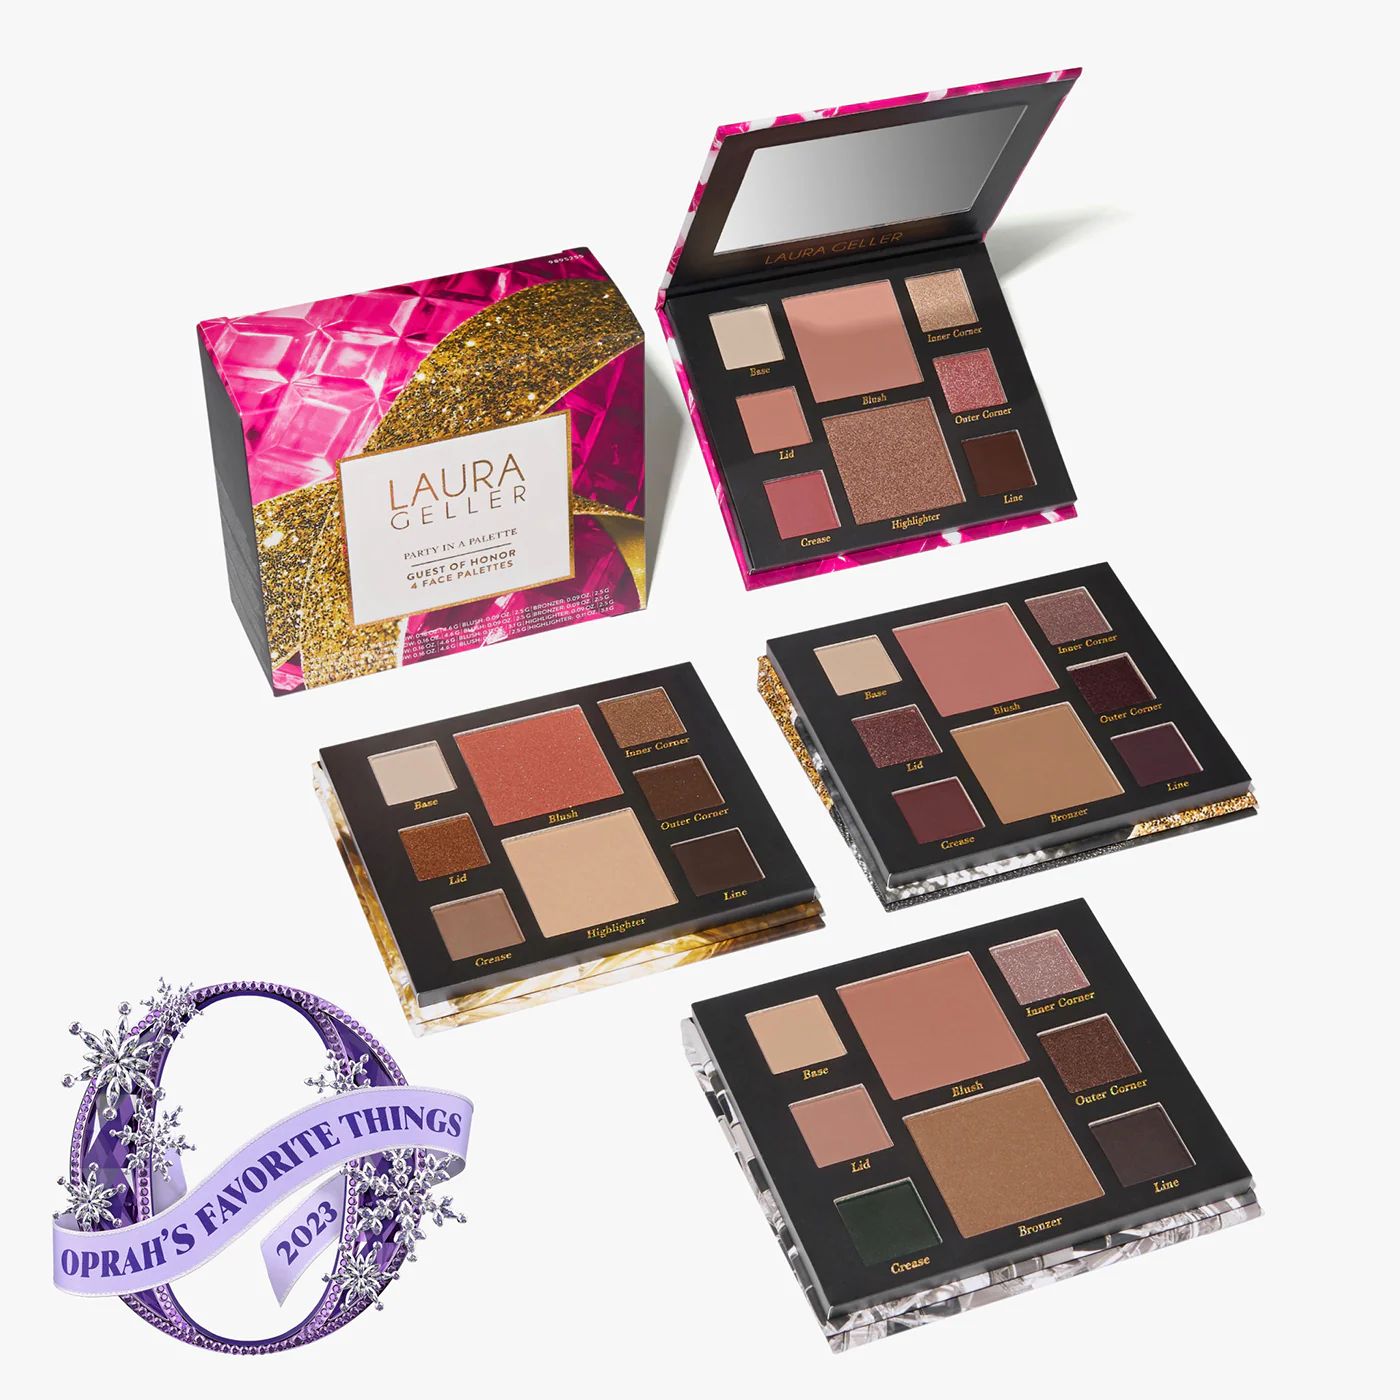 Party in a Palette Guest of Honor 4 Full Face Palettes | Laura Geller